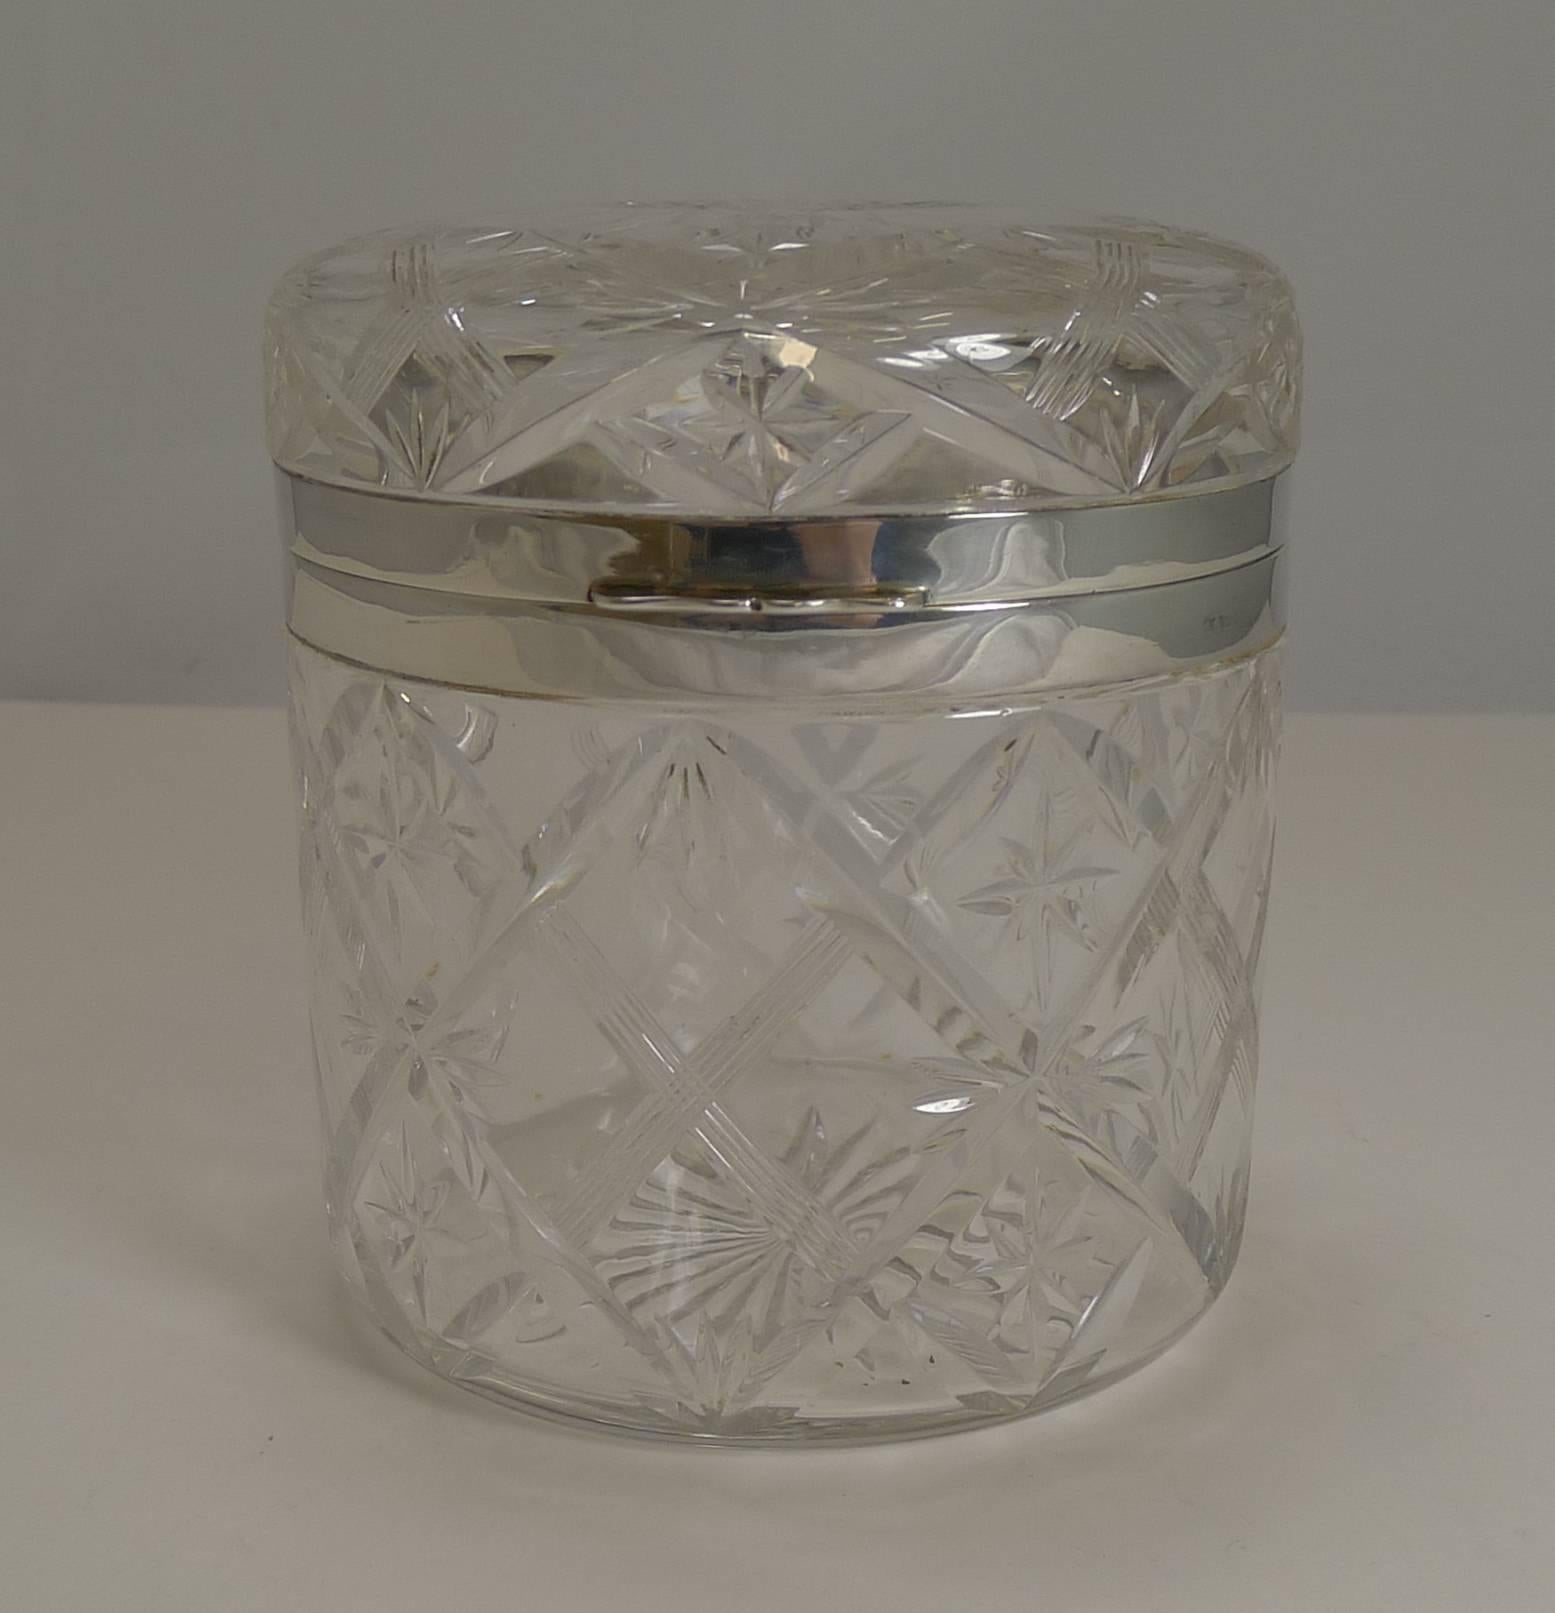 A magnificent large box made from a hefty piece of English crystal with a variety of intricate cutting creating an impressive and truly glamorous piece.

The hinged rims are made from English sterling silver with a full hallmark for the top-notch